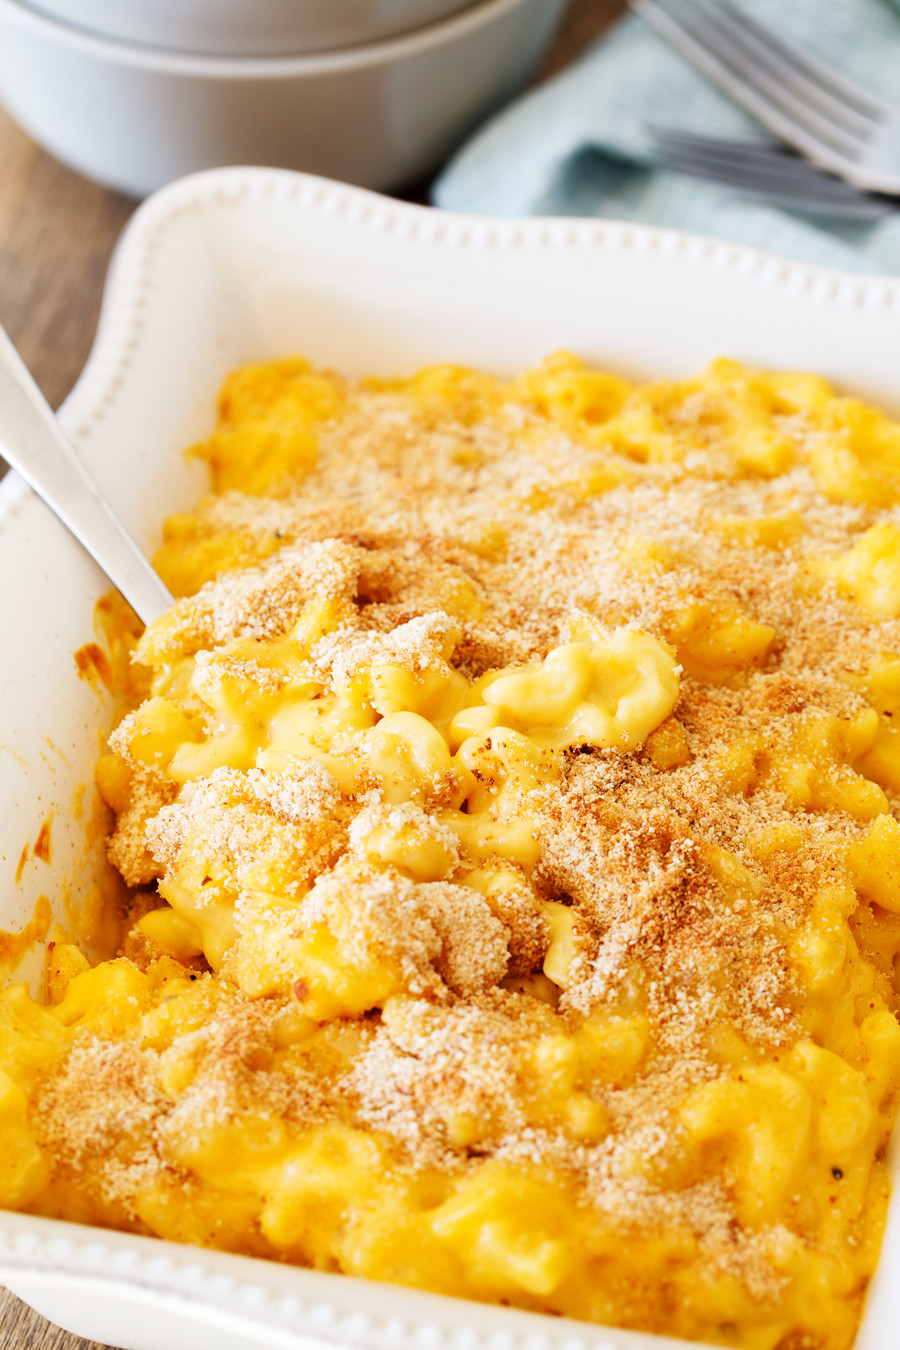 Recipes For Baked Mac And Cheese With Bread Crumbs
 Easy Baked Macaroni & Cheese Made To Be A Momma